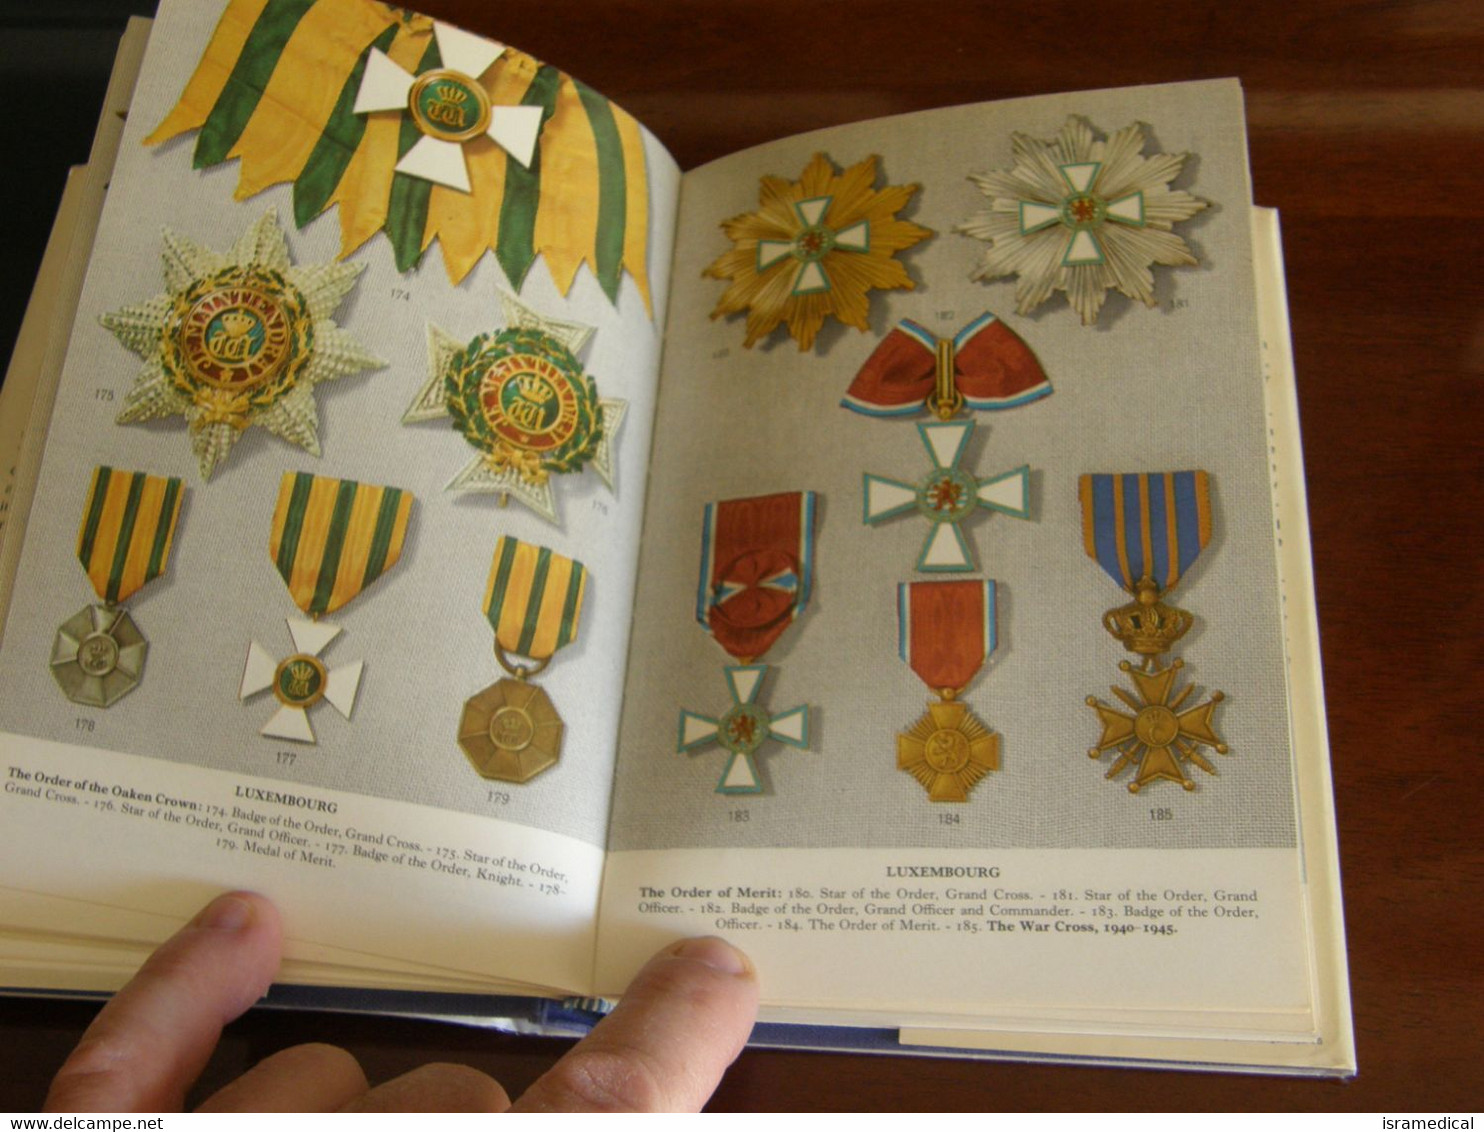 ORDERS AND DECORATIONS OF EUROPE IN COLOR MACMILLAN - Books & CDs